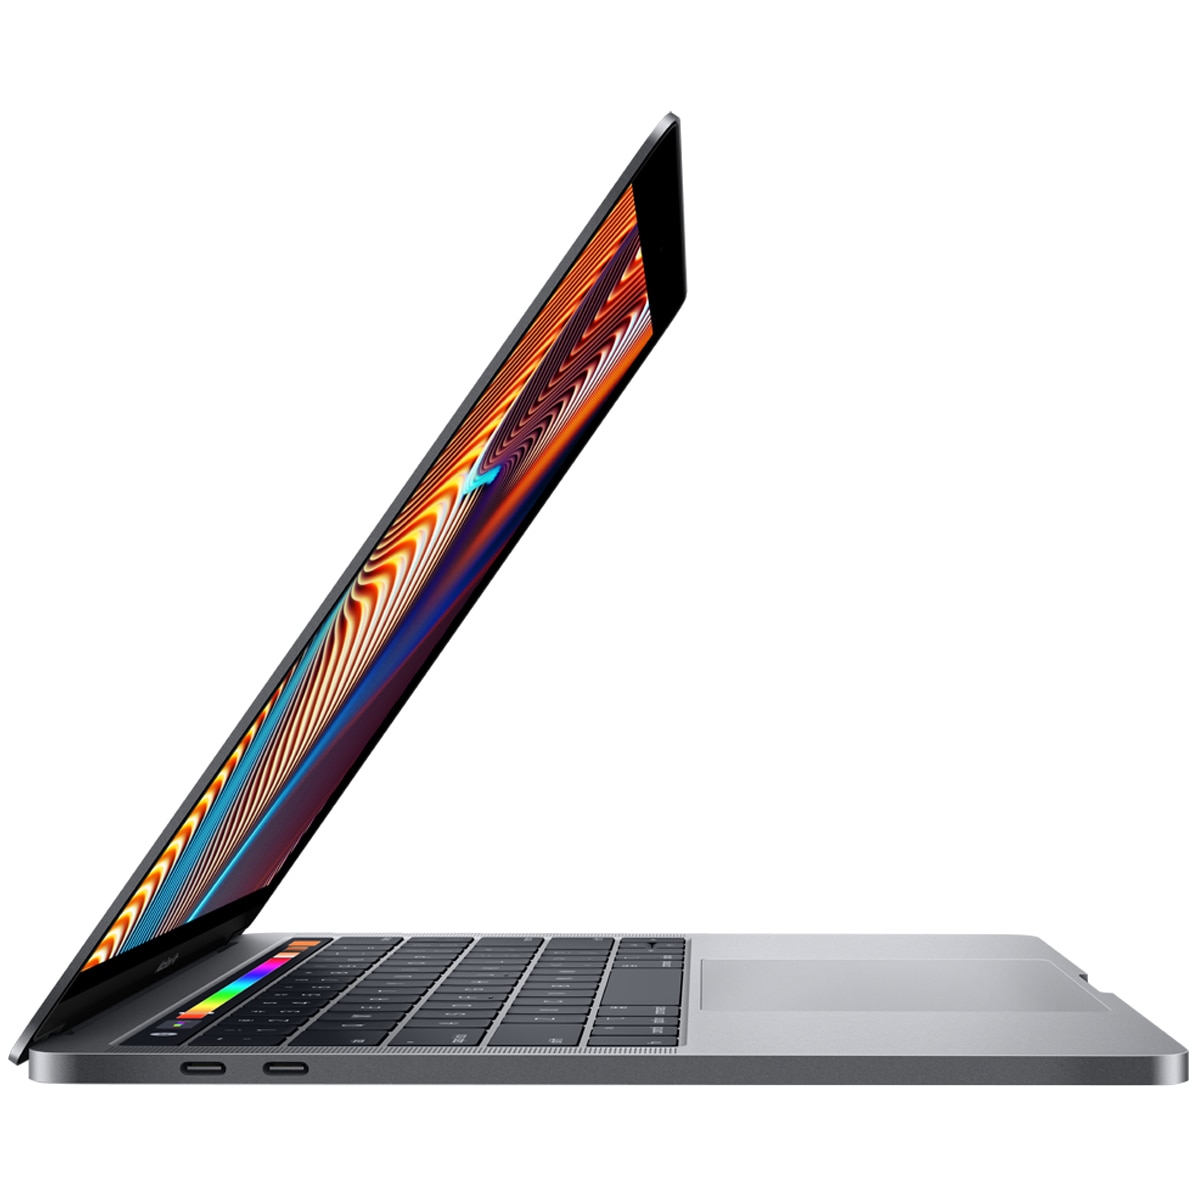 Macbook Pro MUHP2X/A 13-inch MacBook Pro with Touch Bar: 1.4GHz quad-core 8th-generation Intel Core i5 processor, 256GB - Space Grey